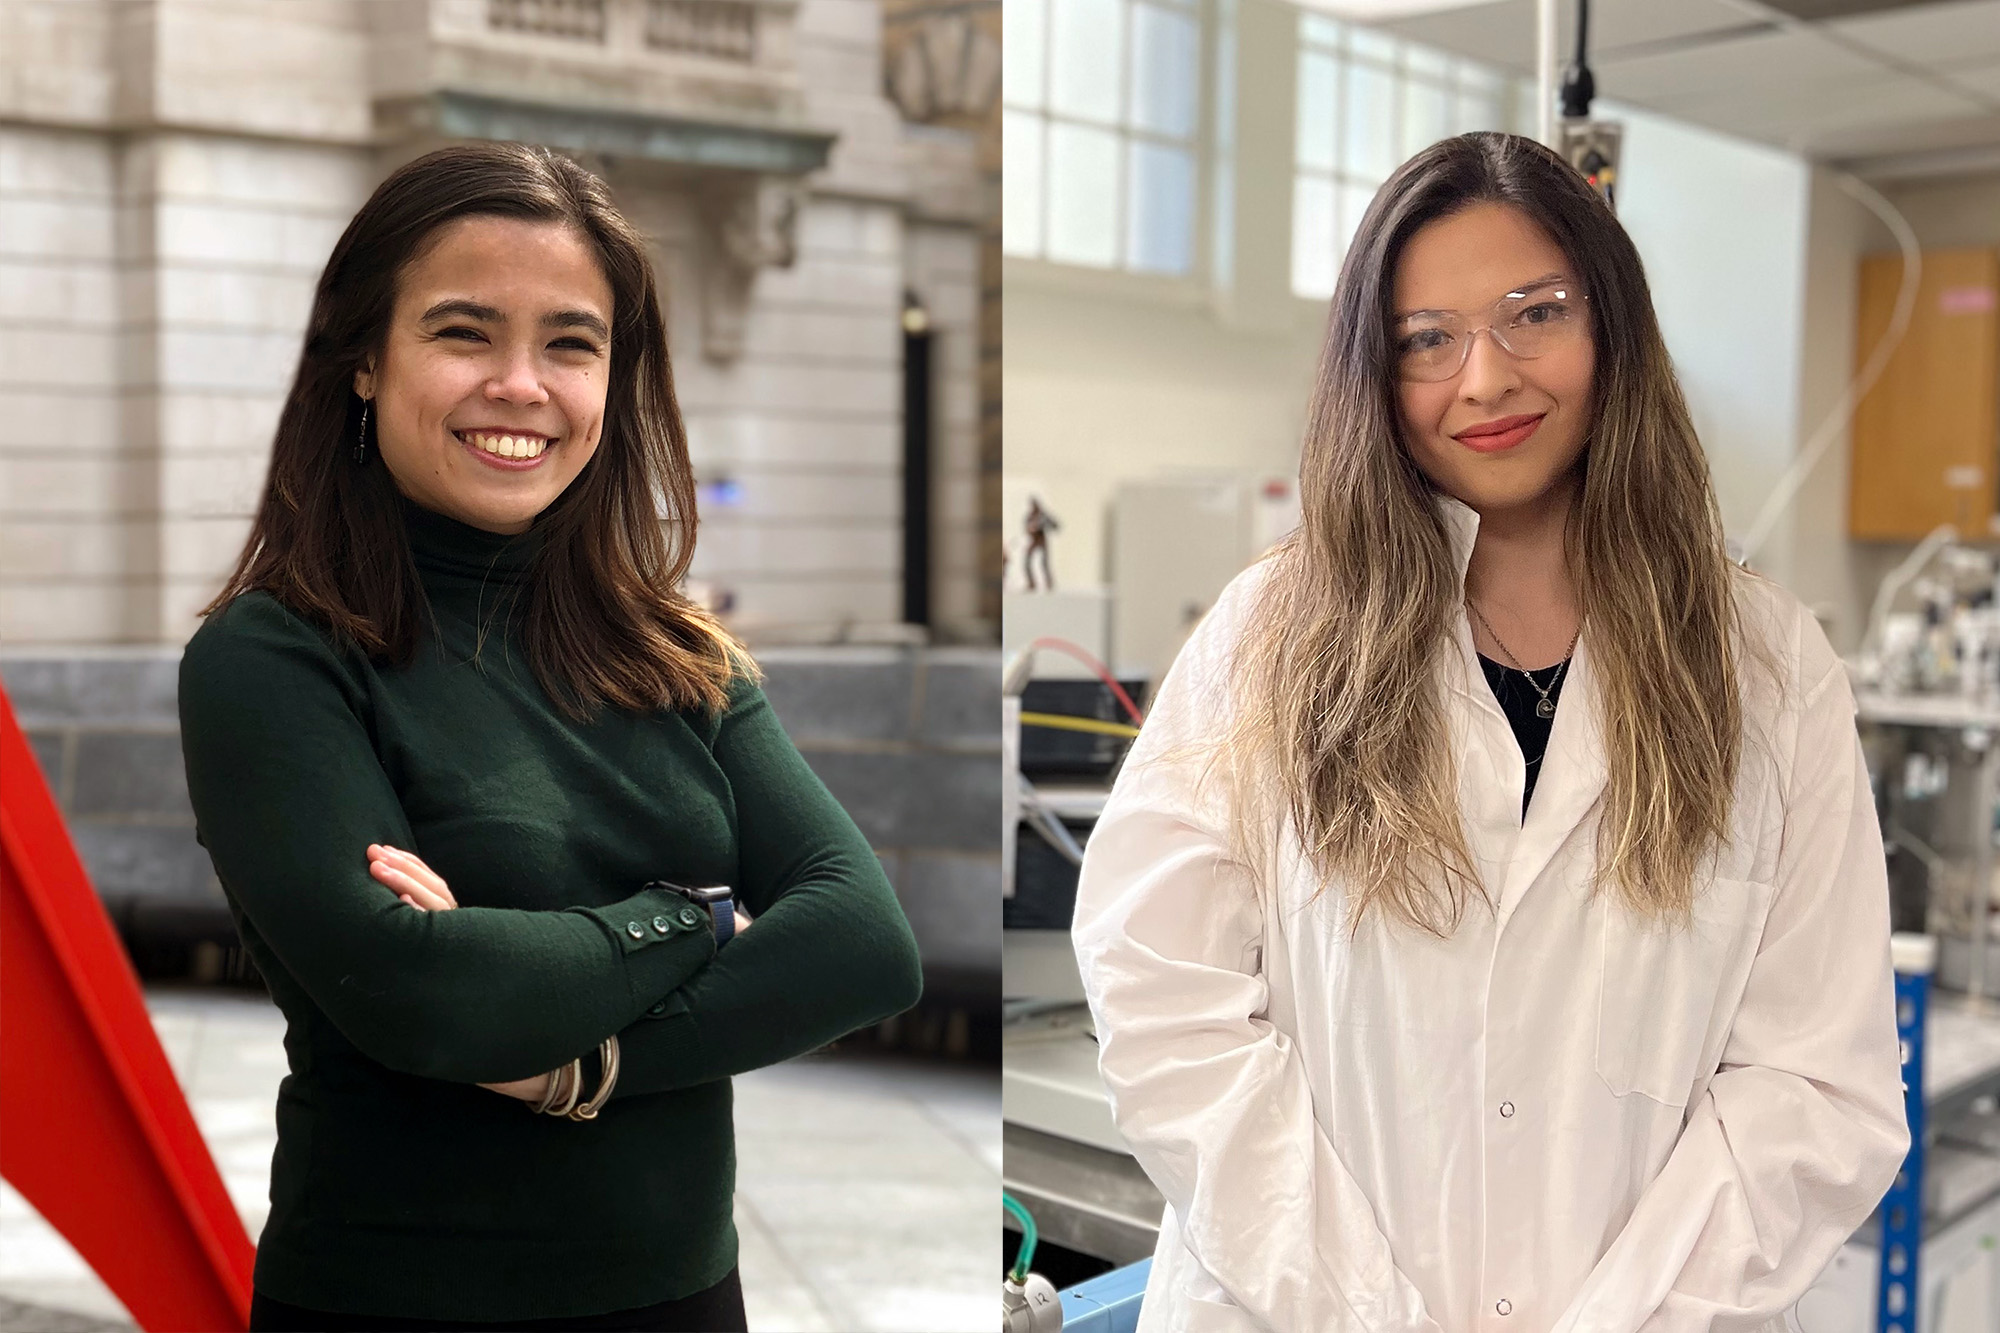 MIT welcomes two from the Heising-Simons Foundation 51 Pegasi b Fellowship for 2022